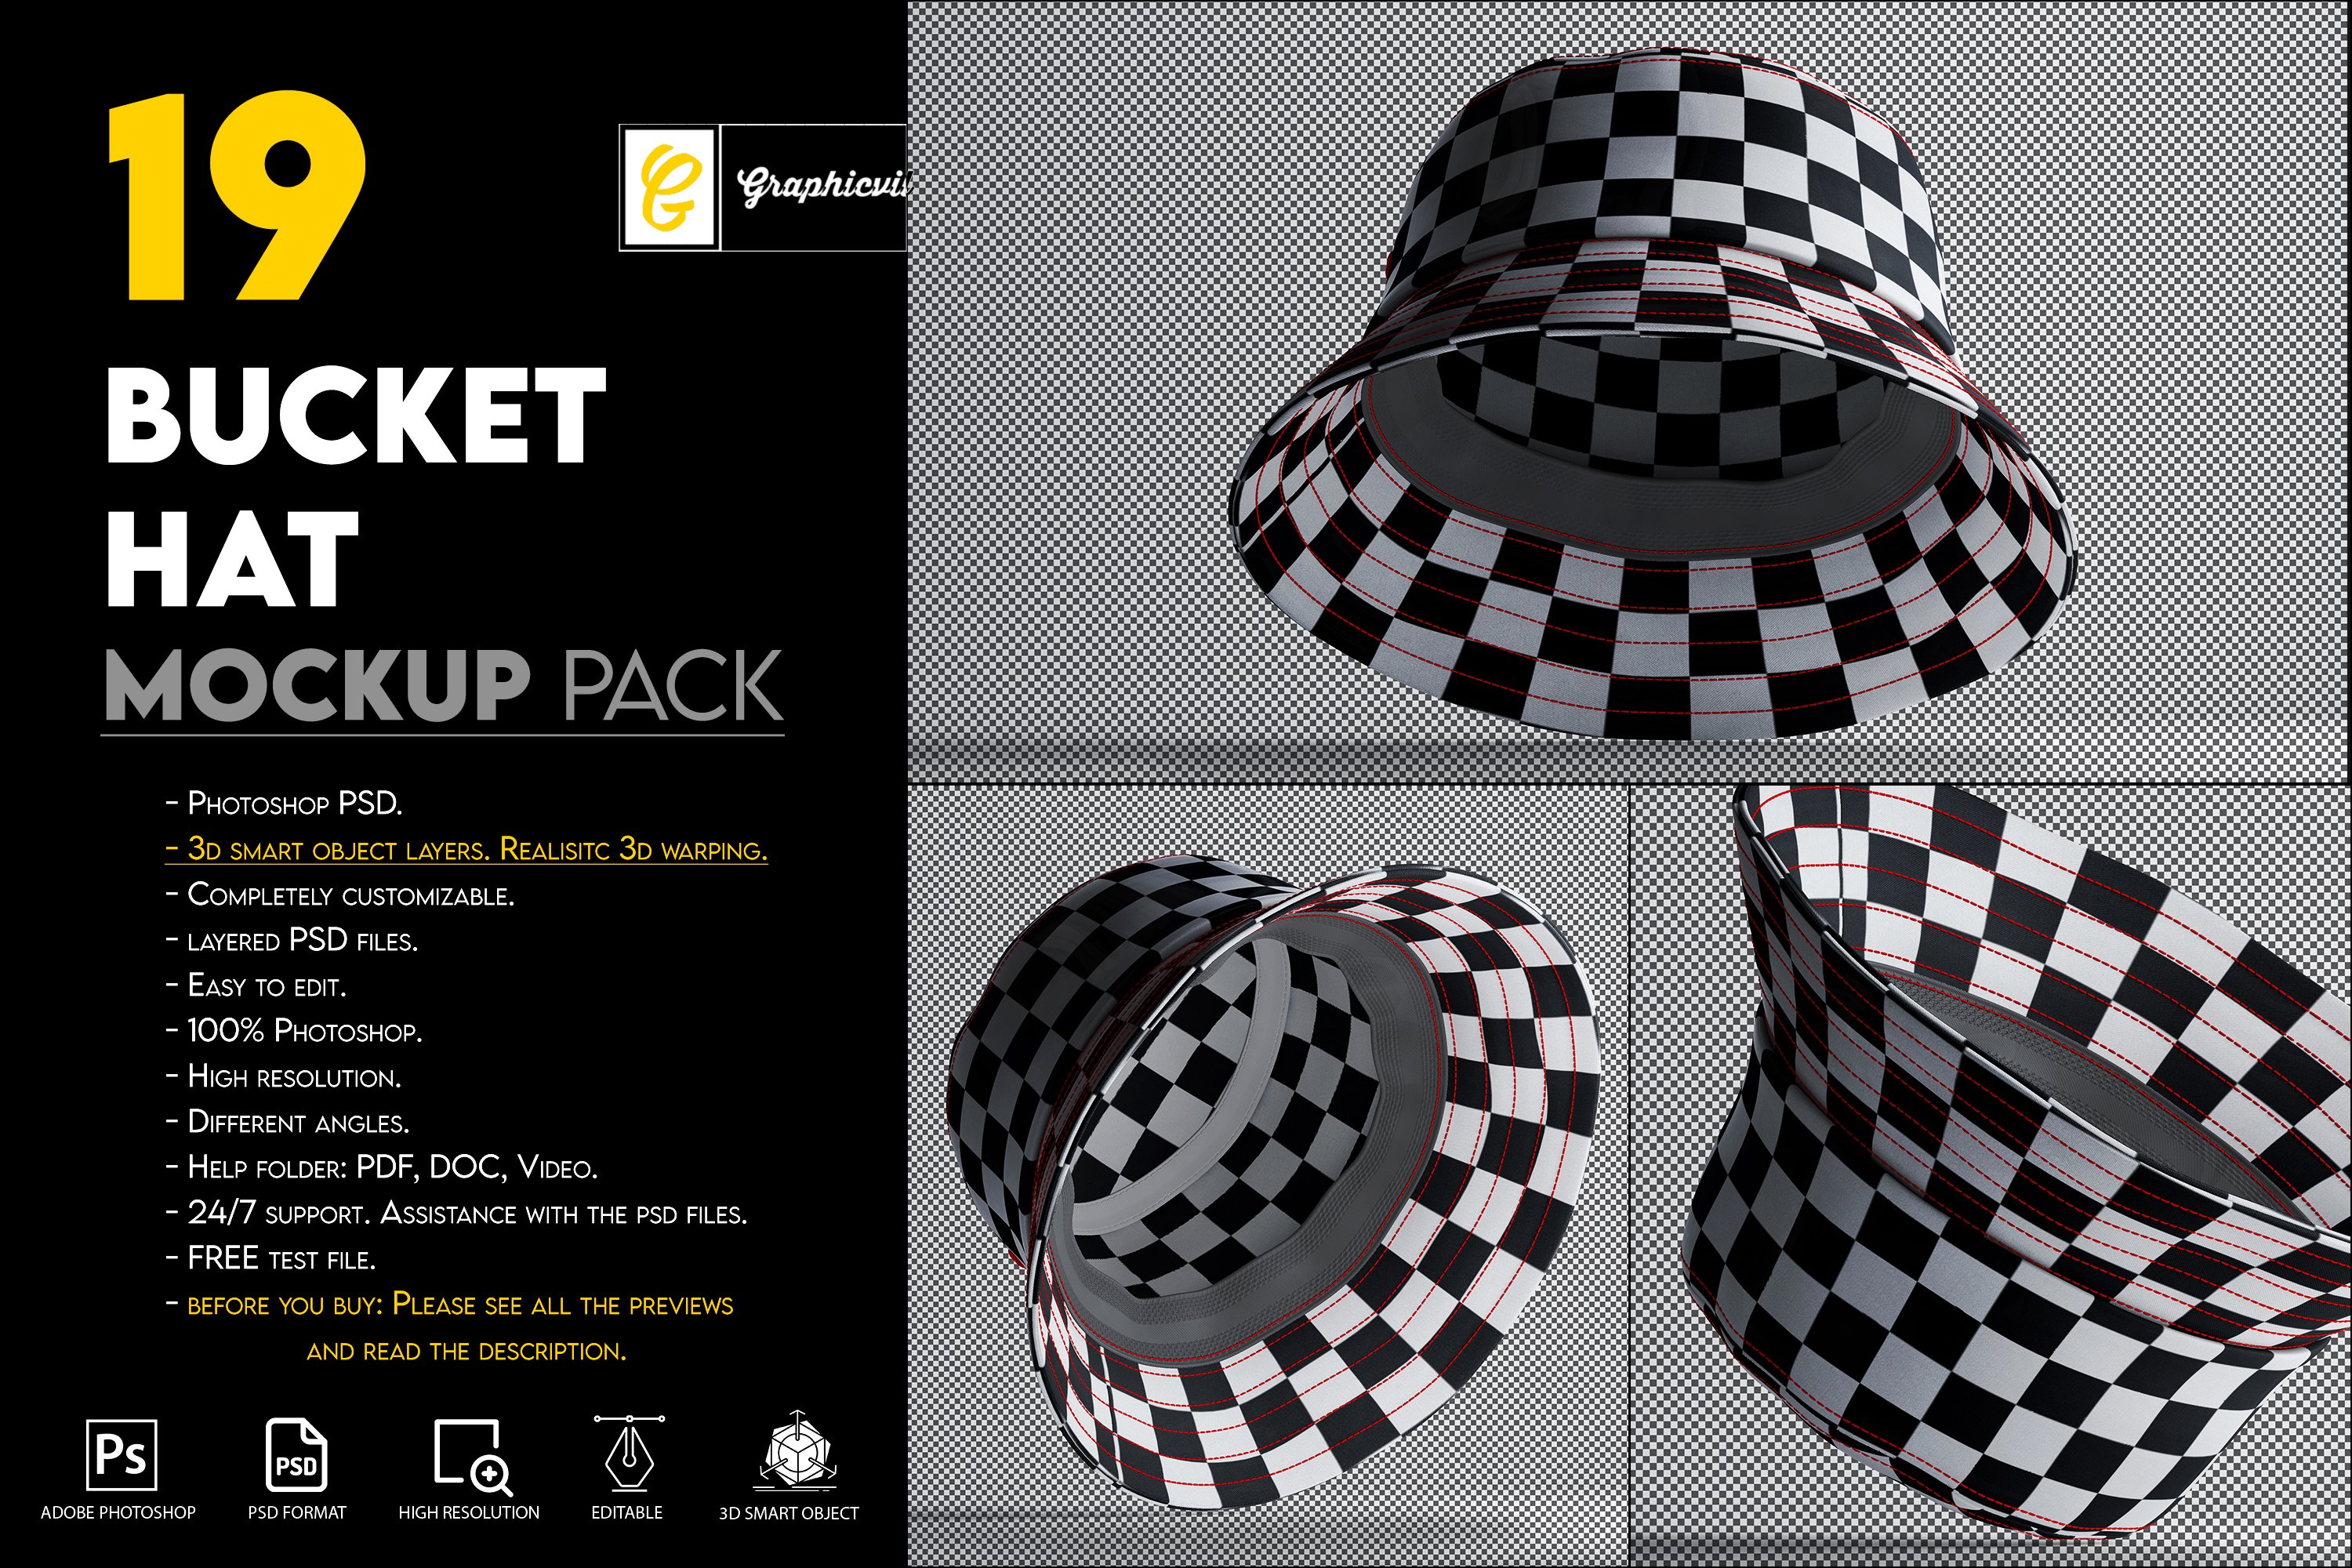 Bucket Hat Mocukp preview image.